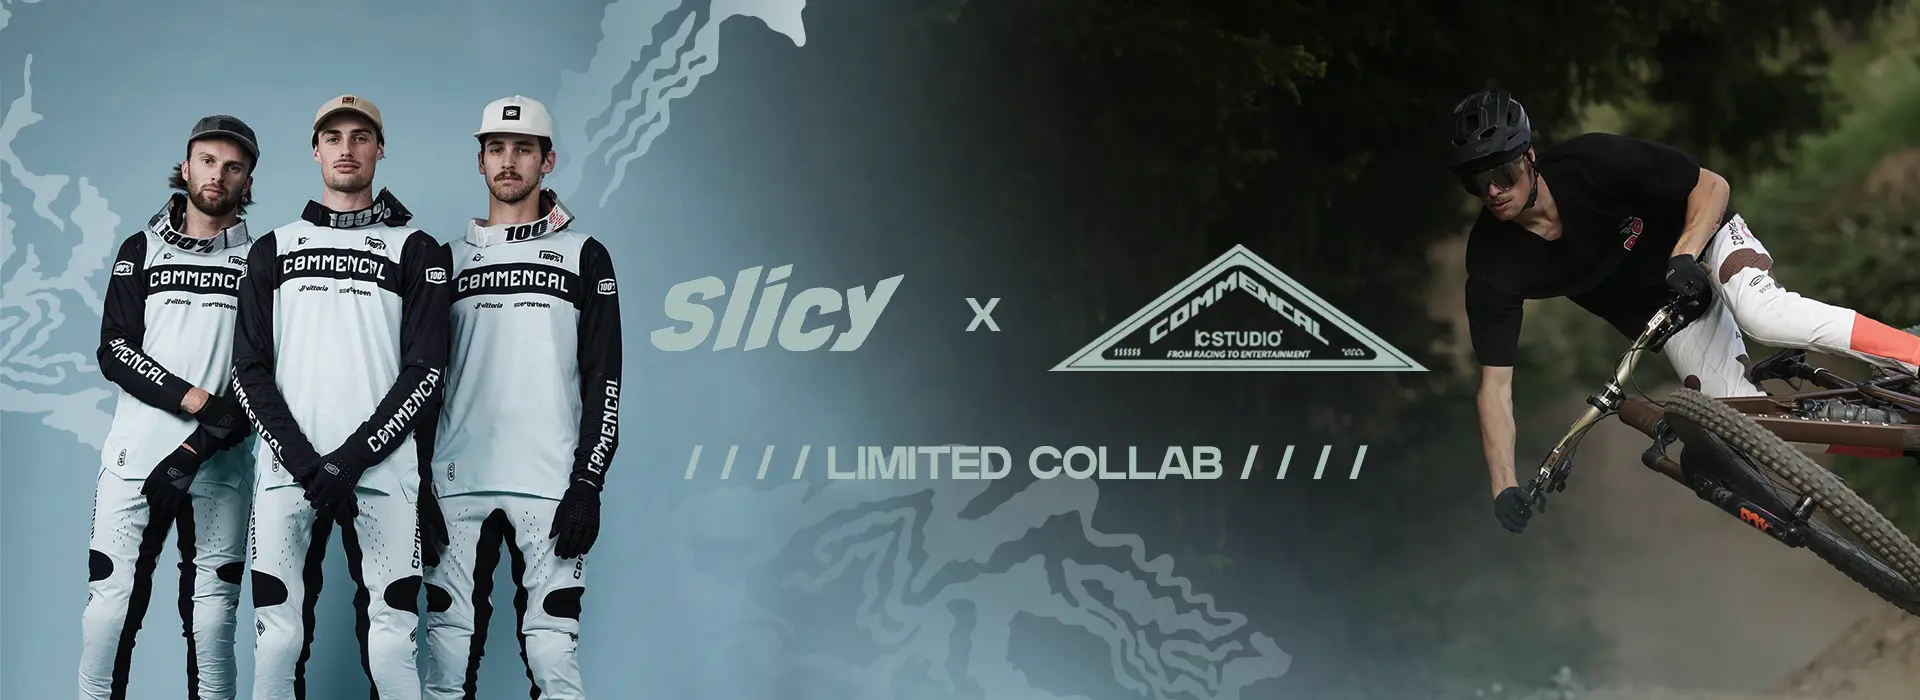 limited collab slicy x commencal ic studio